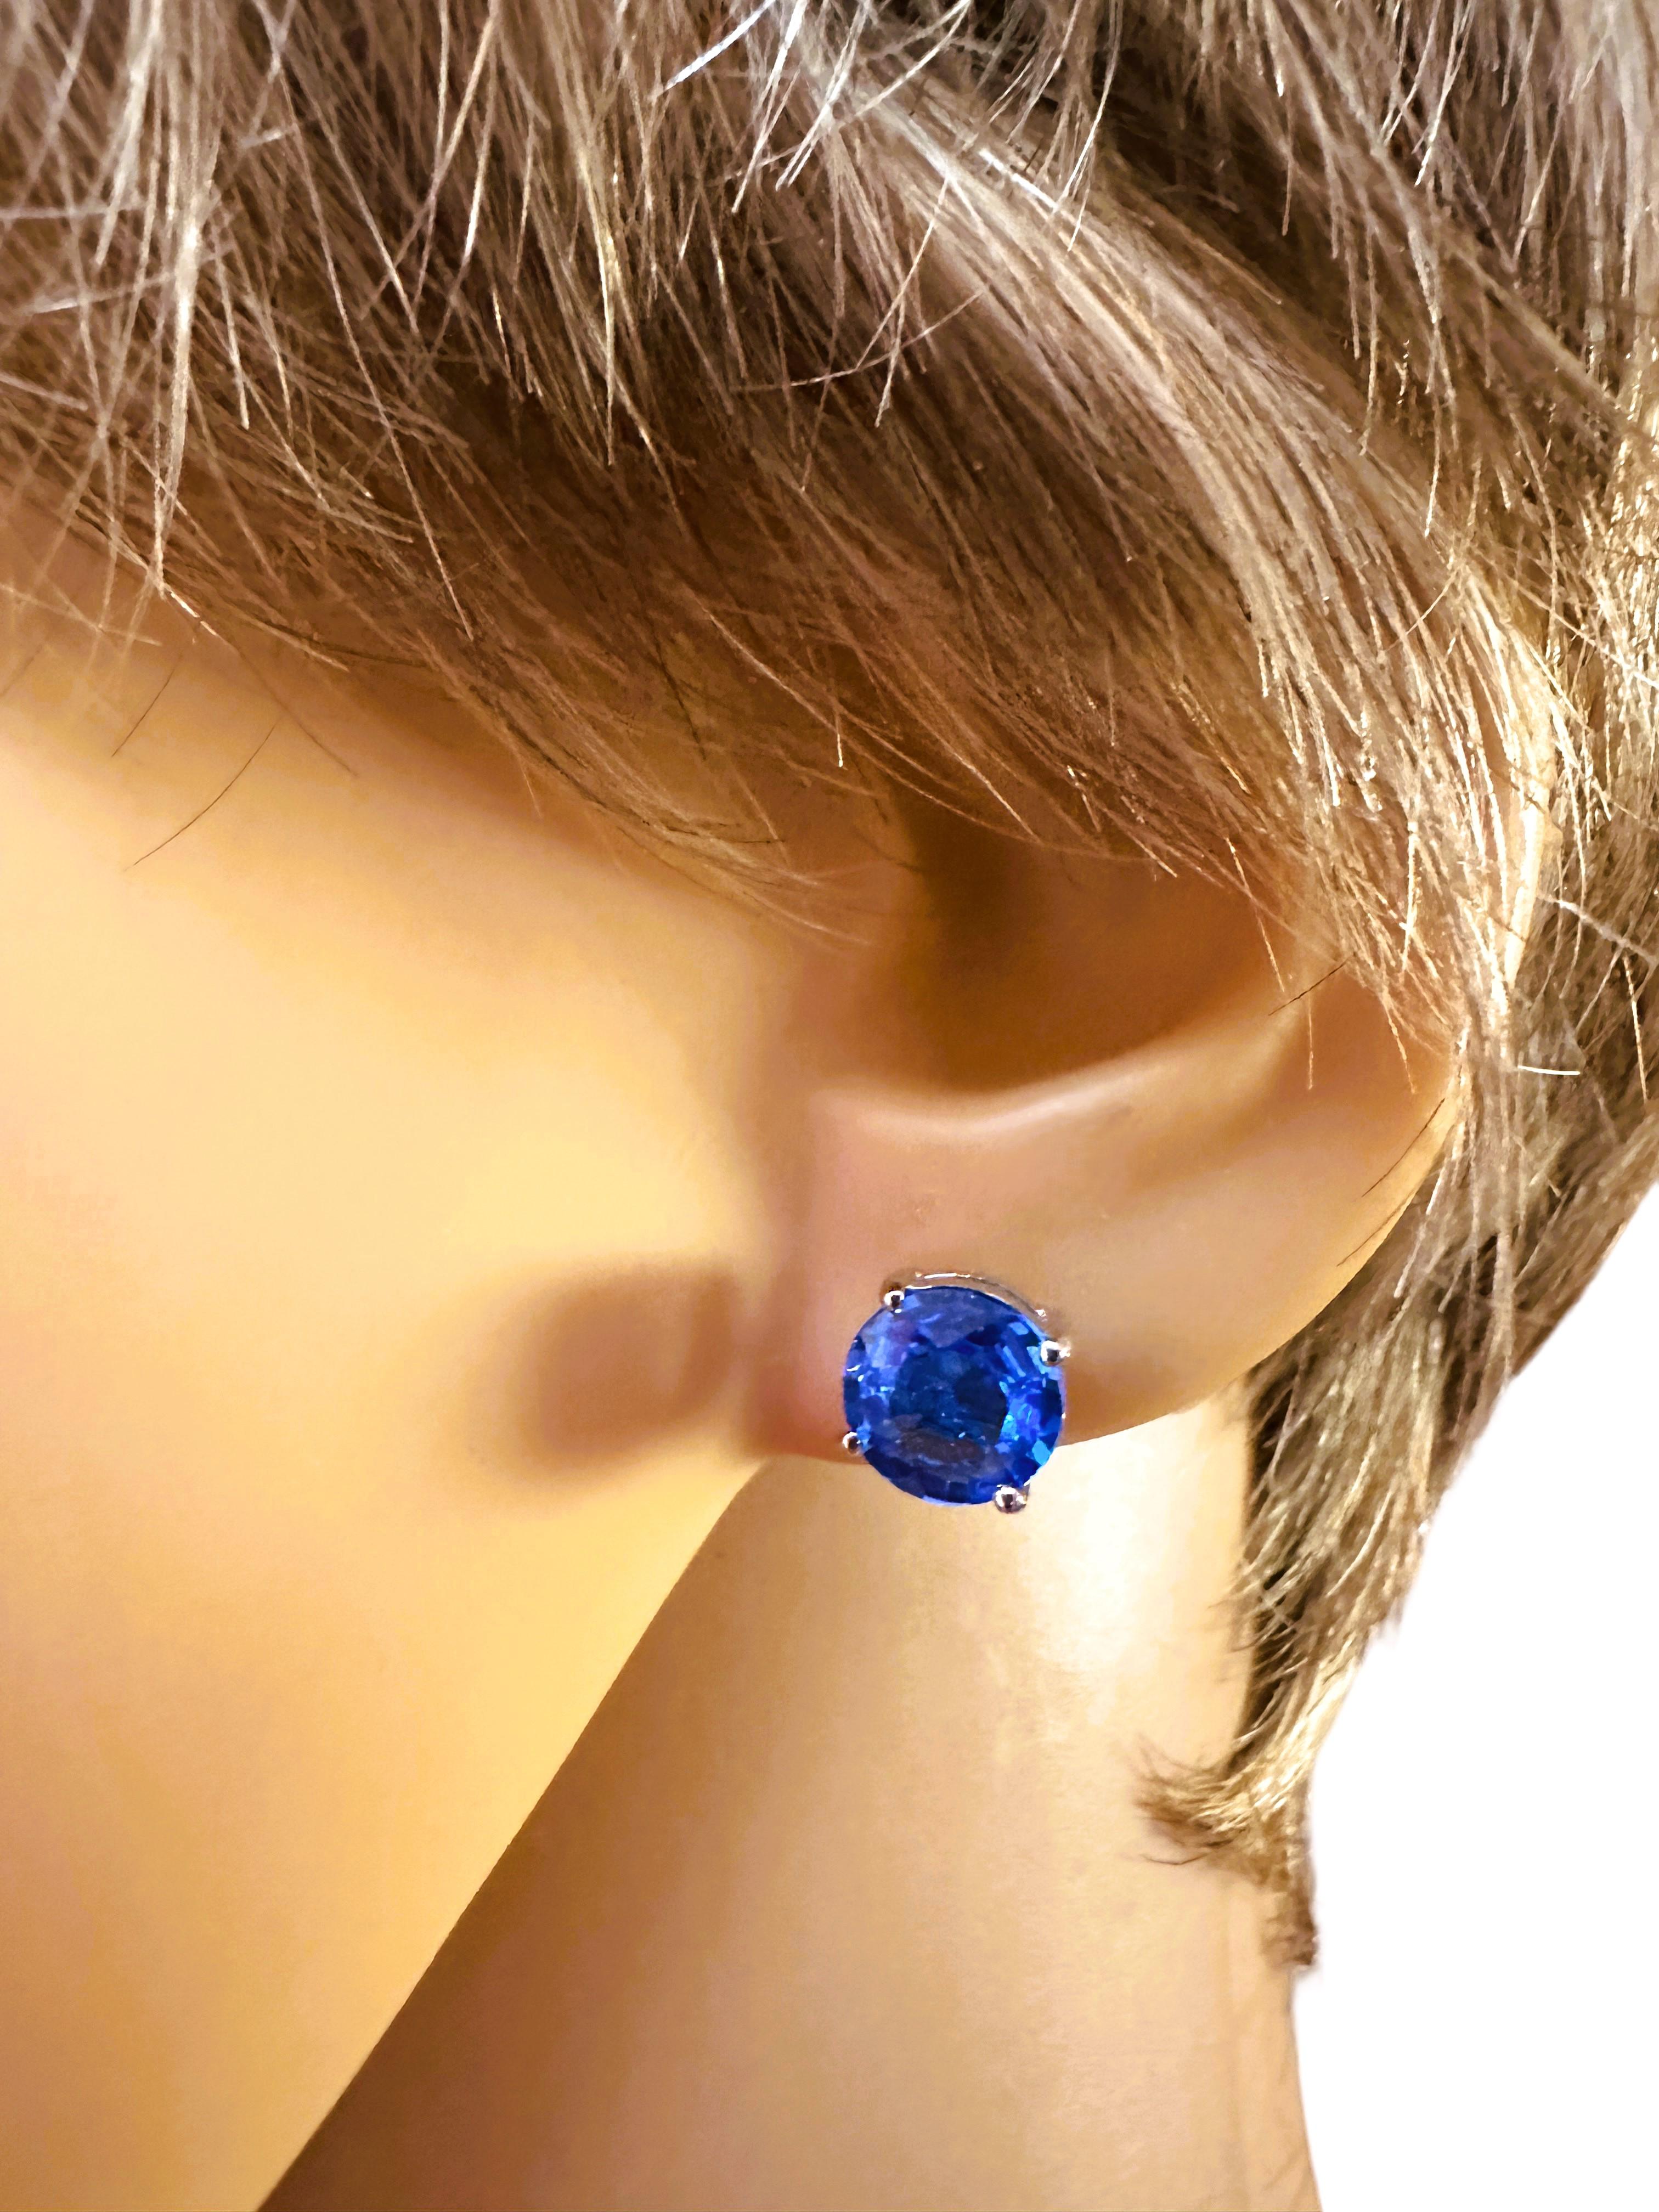 New Cambodian 4.30 ct Cobalt Blue Zircon Sterling Earrings For Sale 1